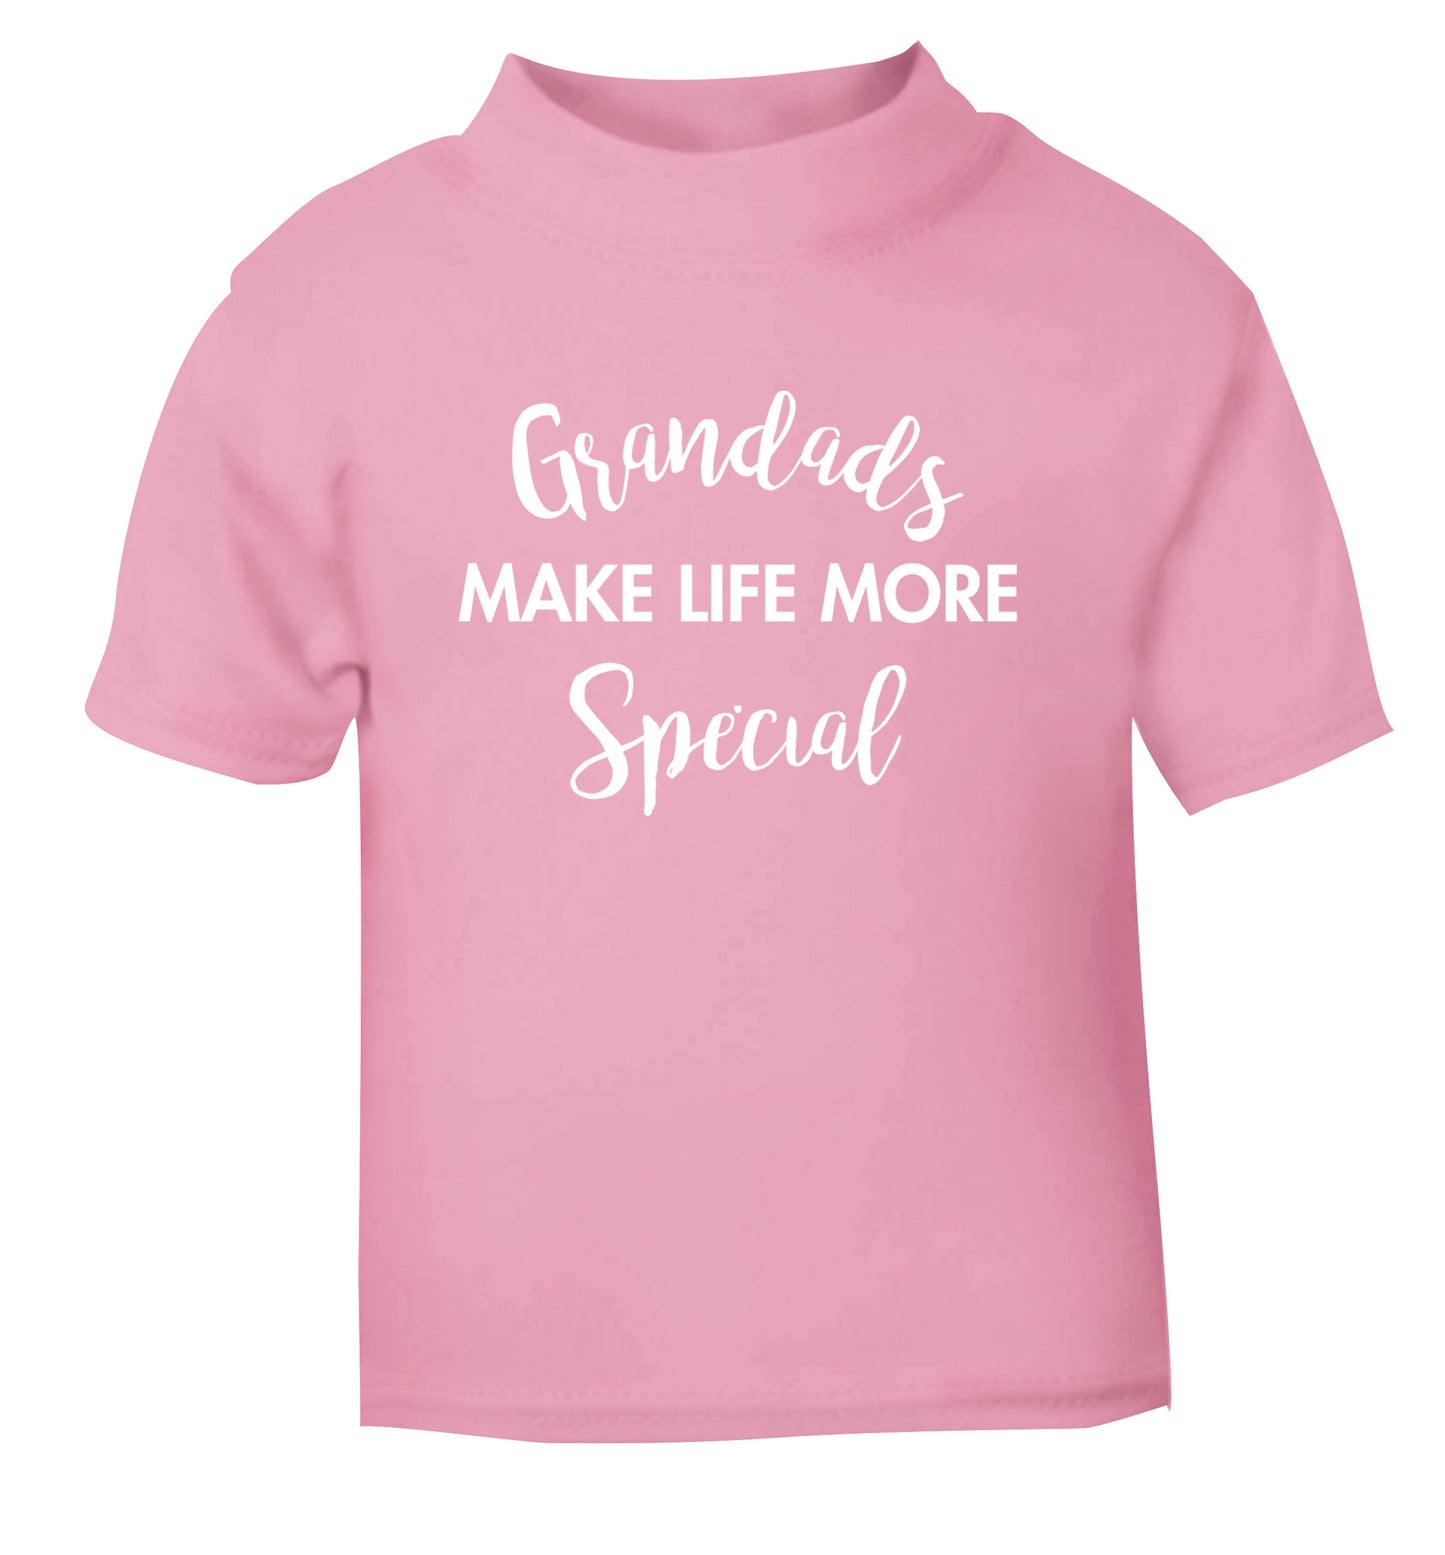 Grandads make life more special light pink Baby Toddler Tshirt 2 Years